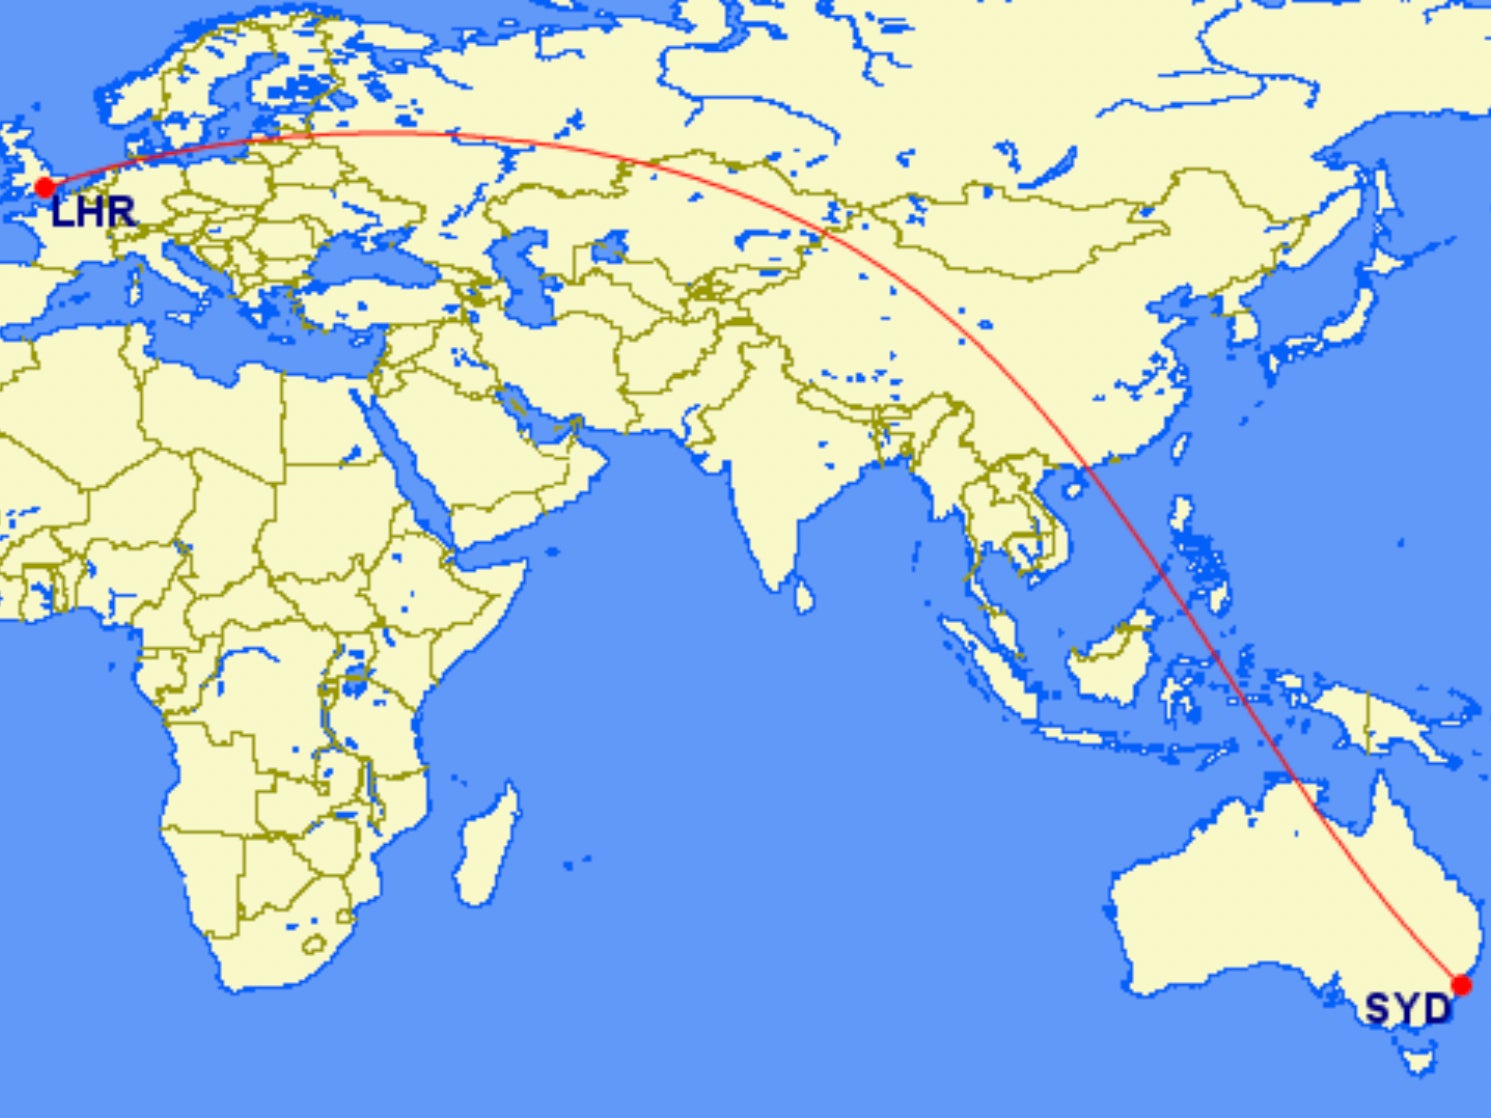 Straight line: the ‘great circle’ route from London to Sydney